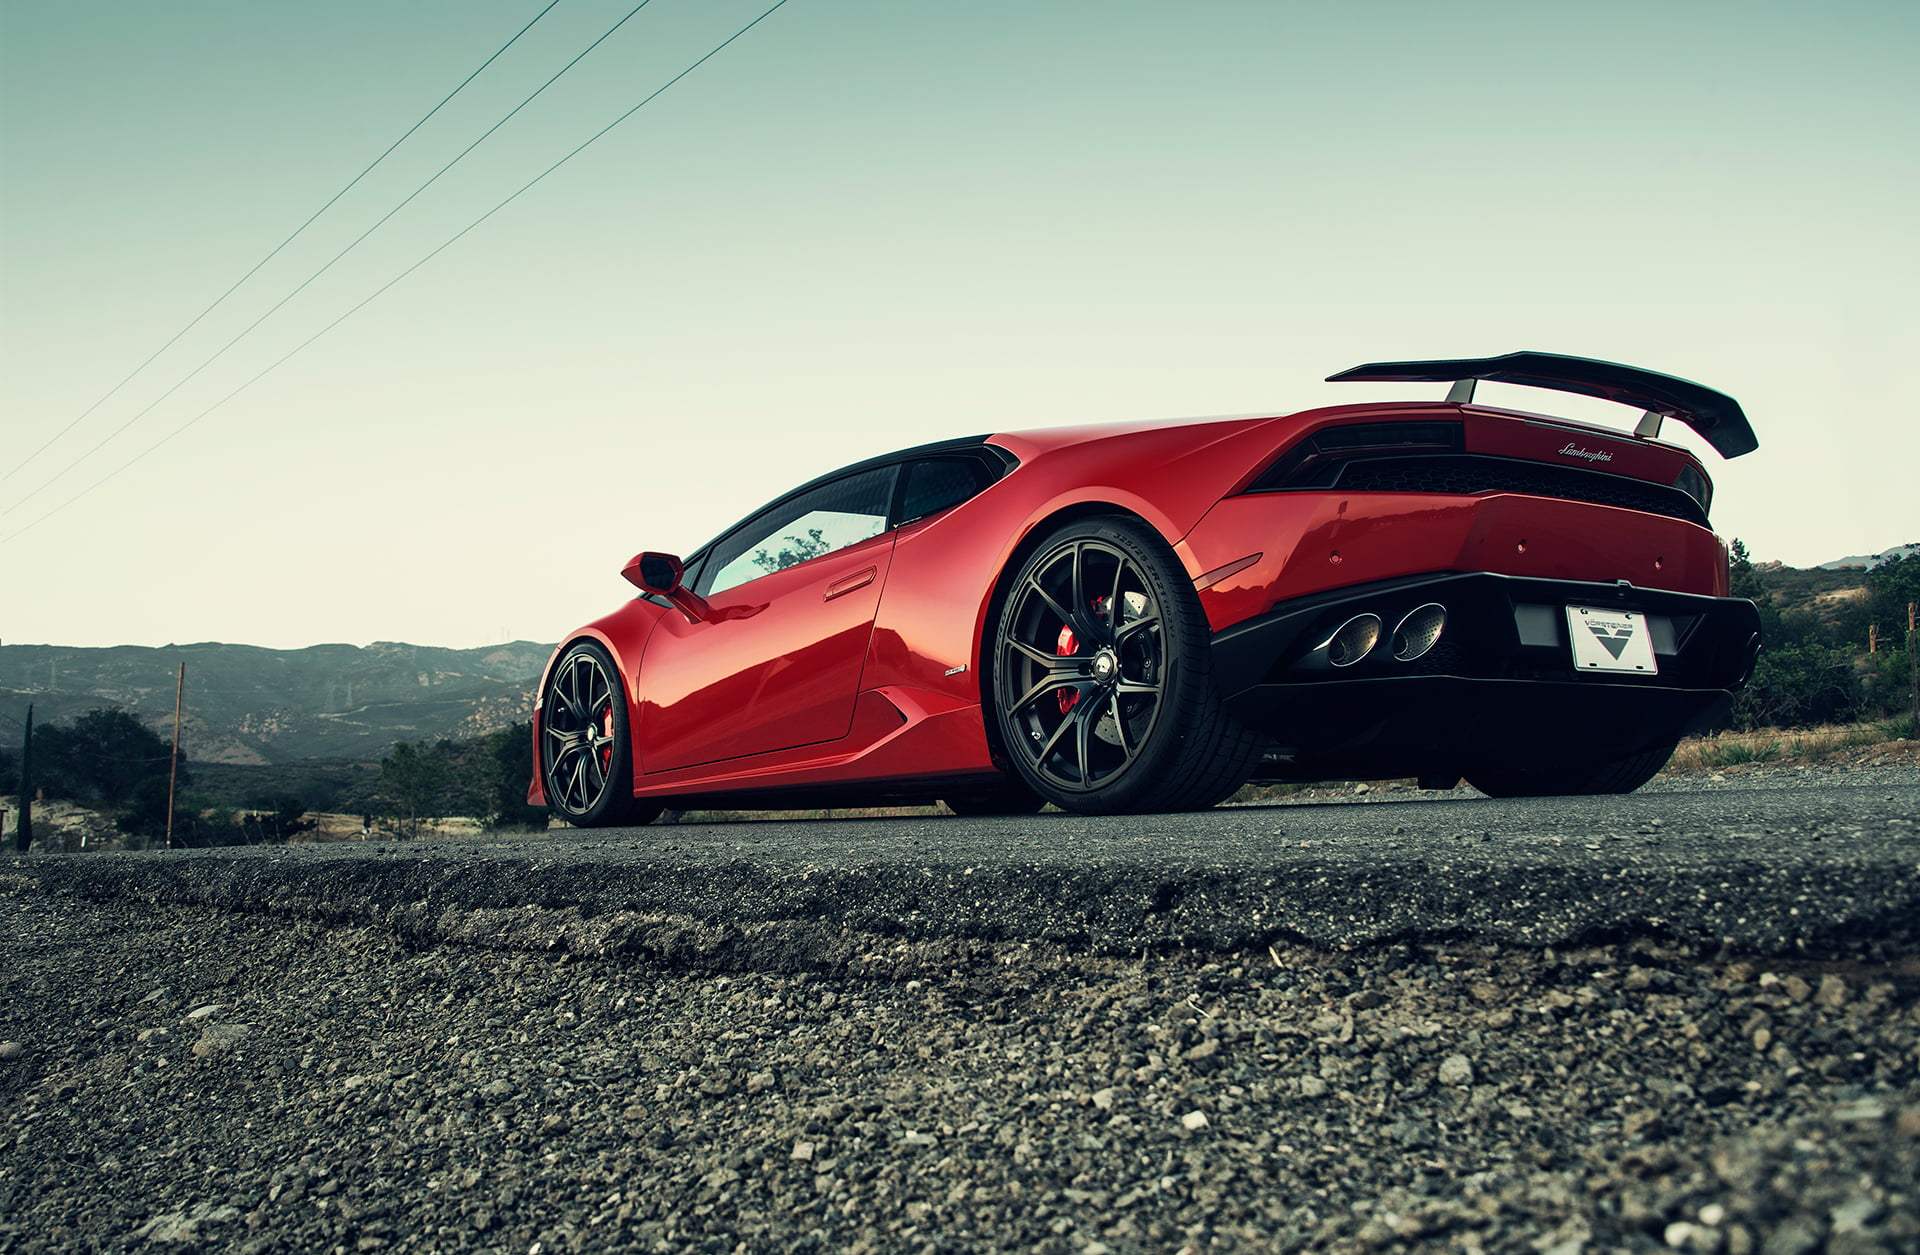 Featured image of post Lamborghini Huracan Performante Wallpaper Iphone Download lamborghini huracan lp610 adv1 2 wallpaper from the above hd widescreen 4k 5k 8k ultra hd resolutions for desktops laptops notebook apple iphone ipad android lamborghini huracan lp610 adv1 2 is part of the lamborghini wallpapers collection